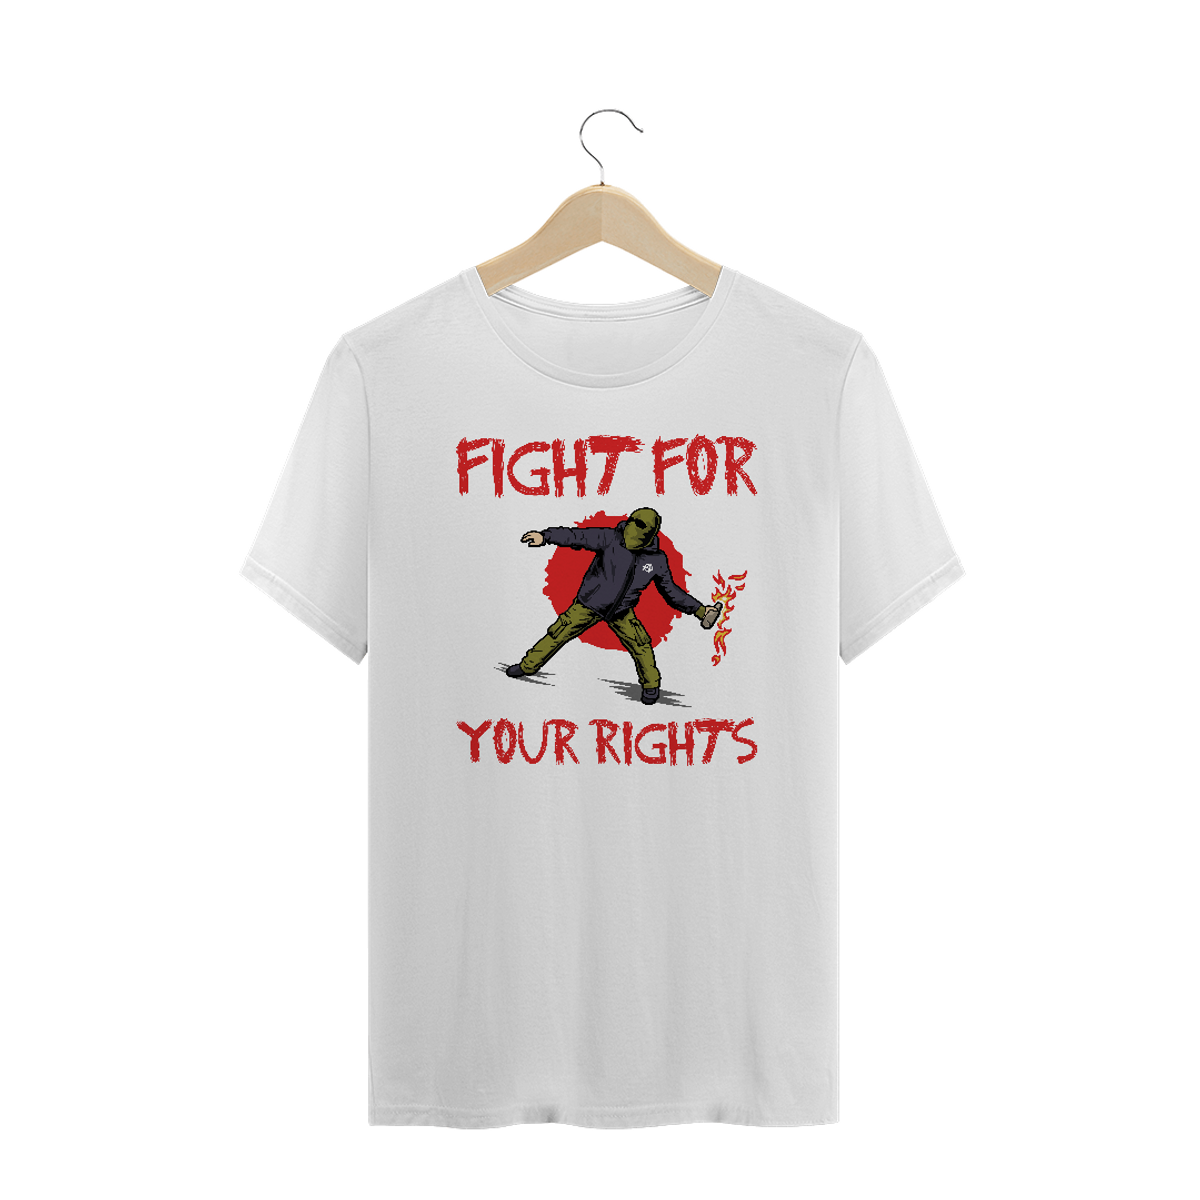 Nome do produtoFIGHT FOR YOUR RIGHTS